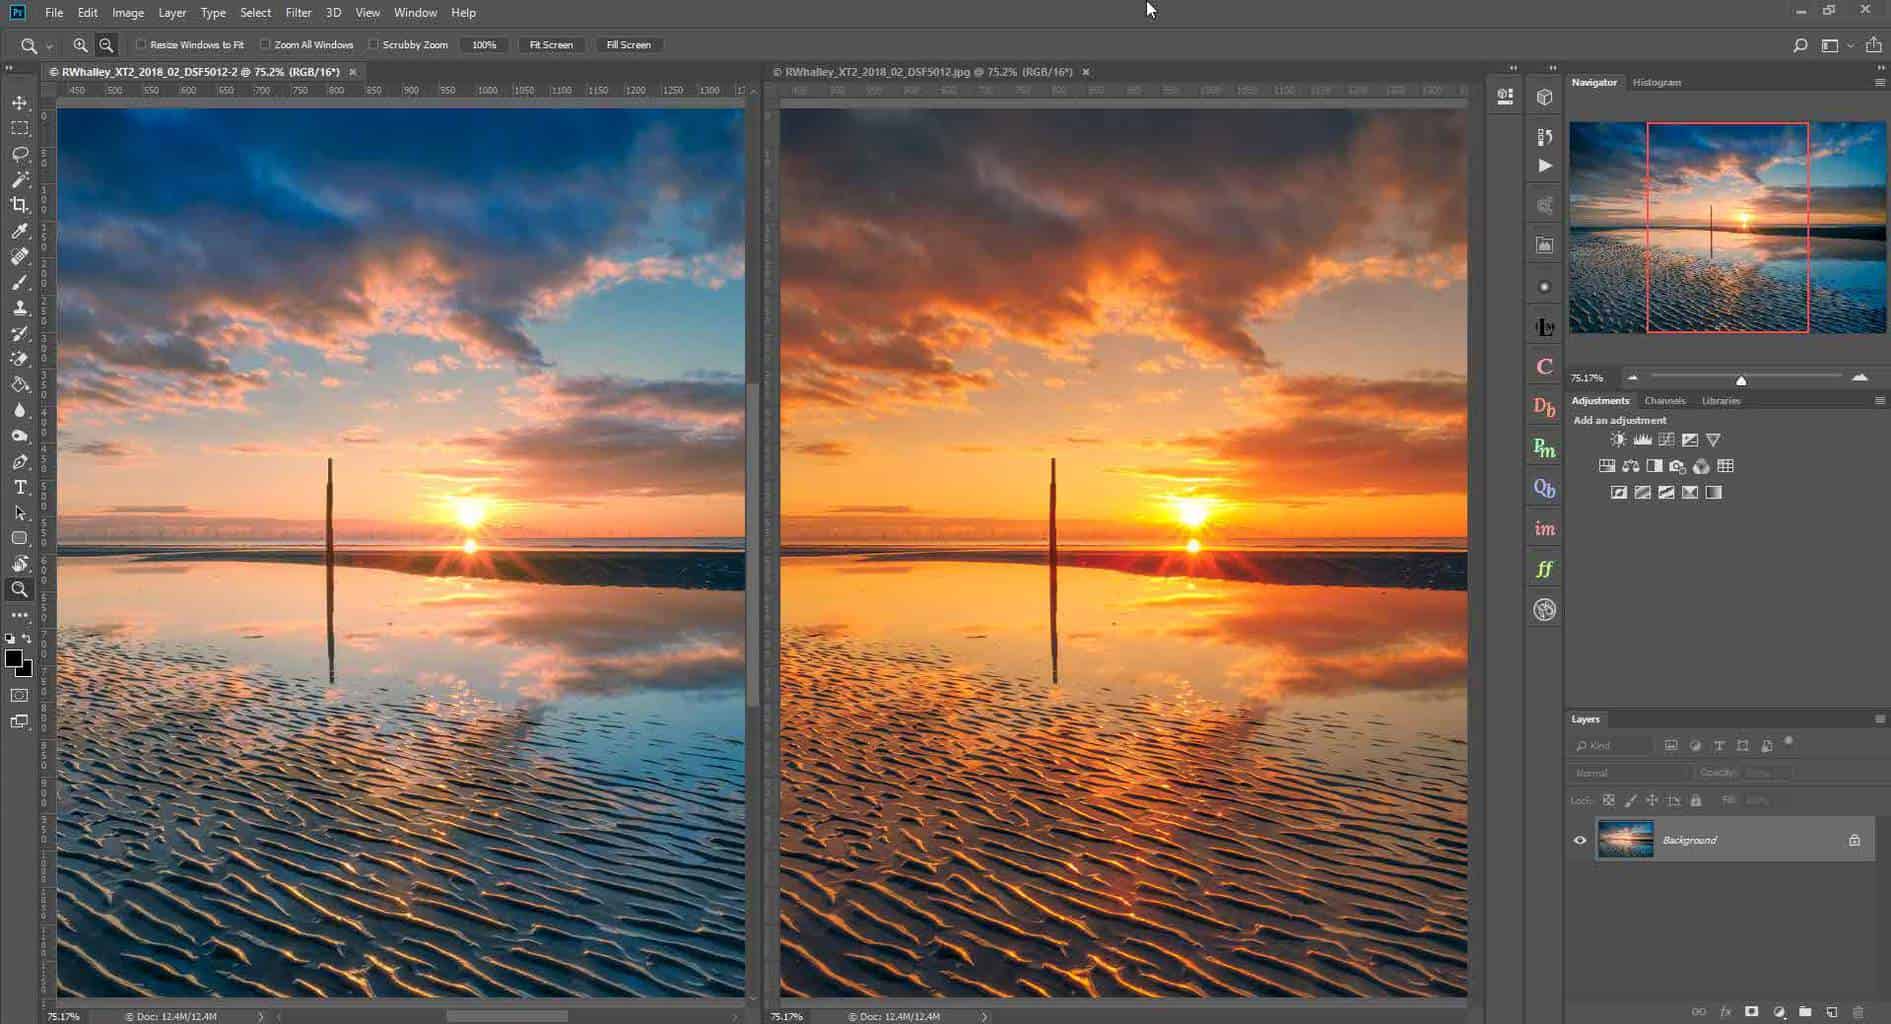 Color Graded images open in Photoshop ready for combining